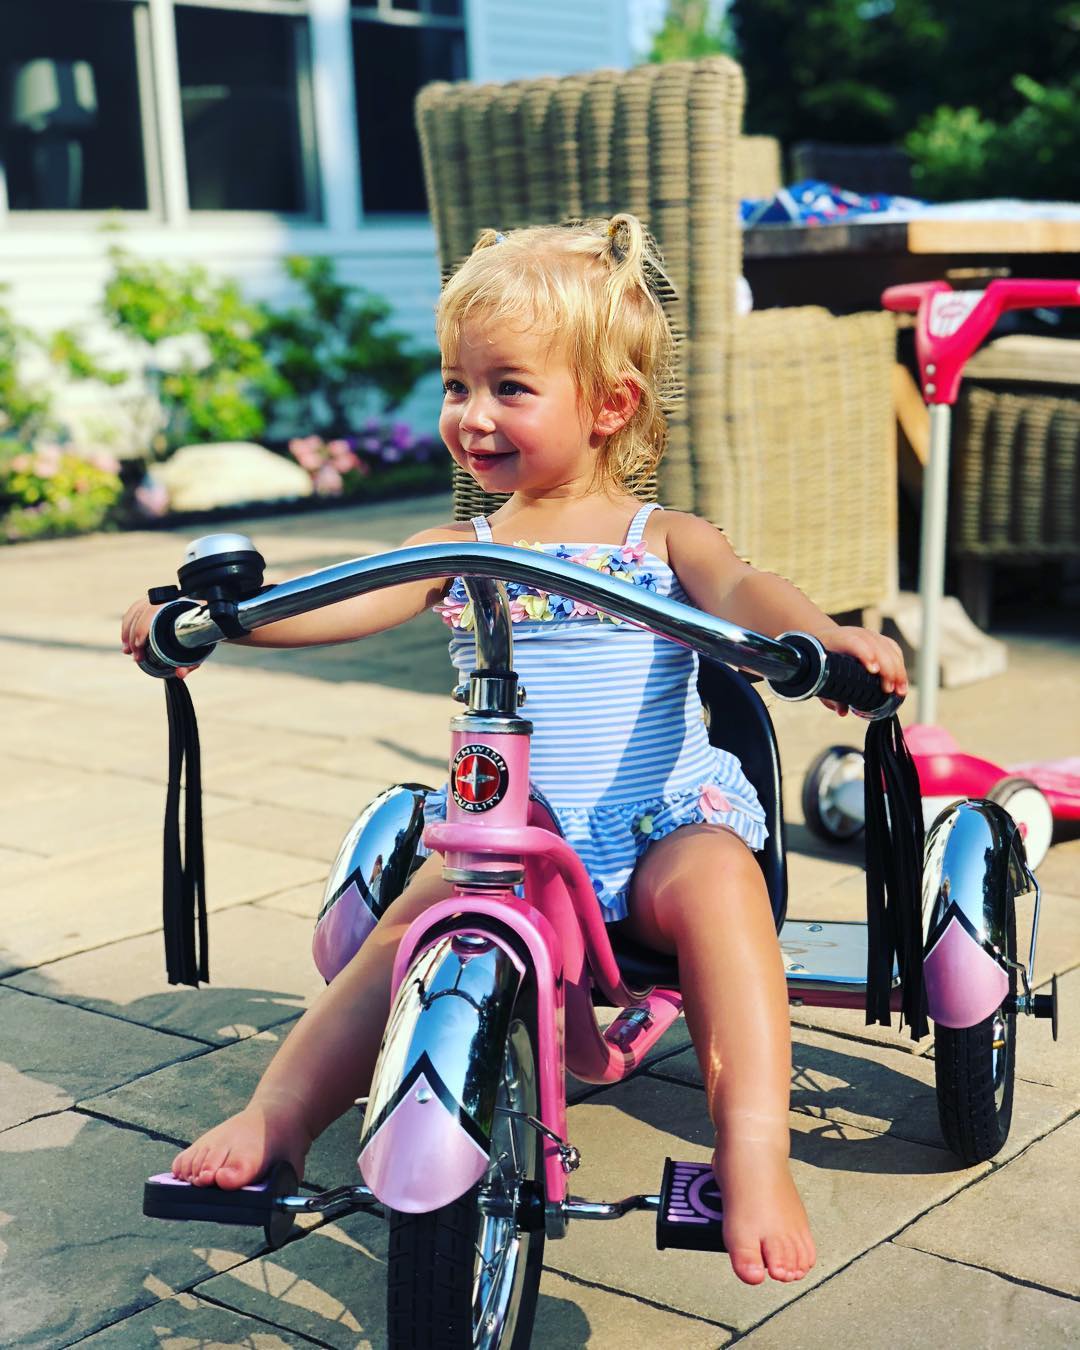 Blake on a tricycle gifted on her birthday